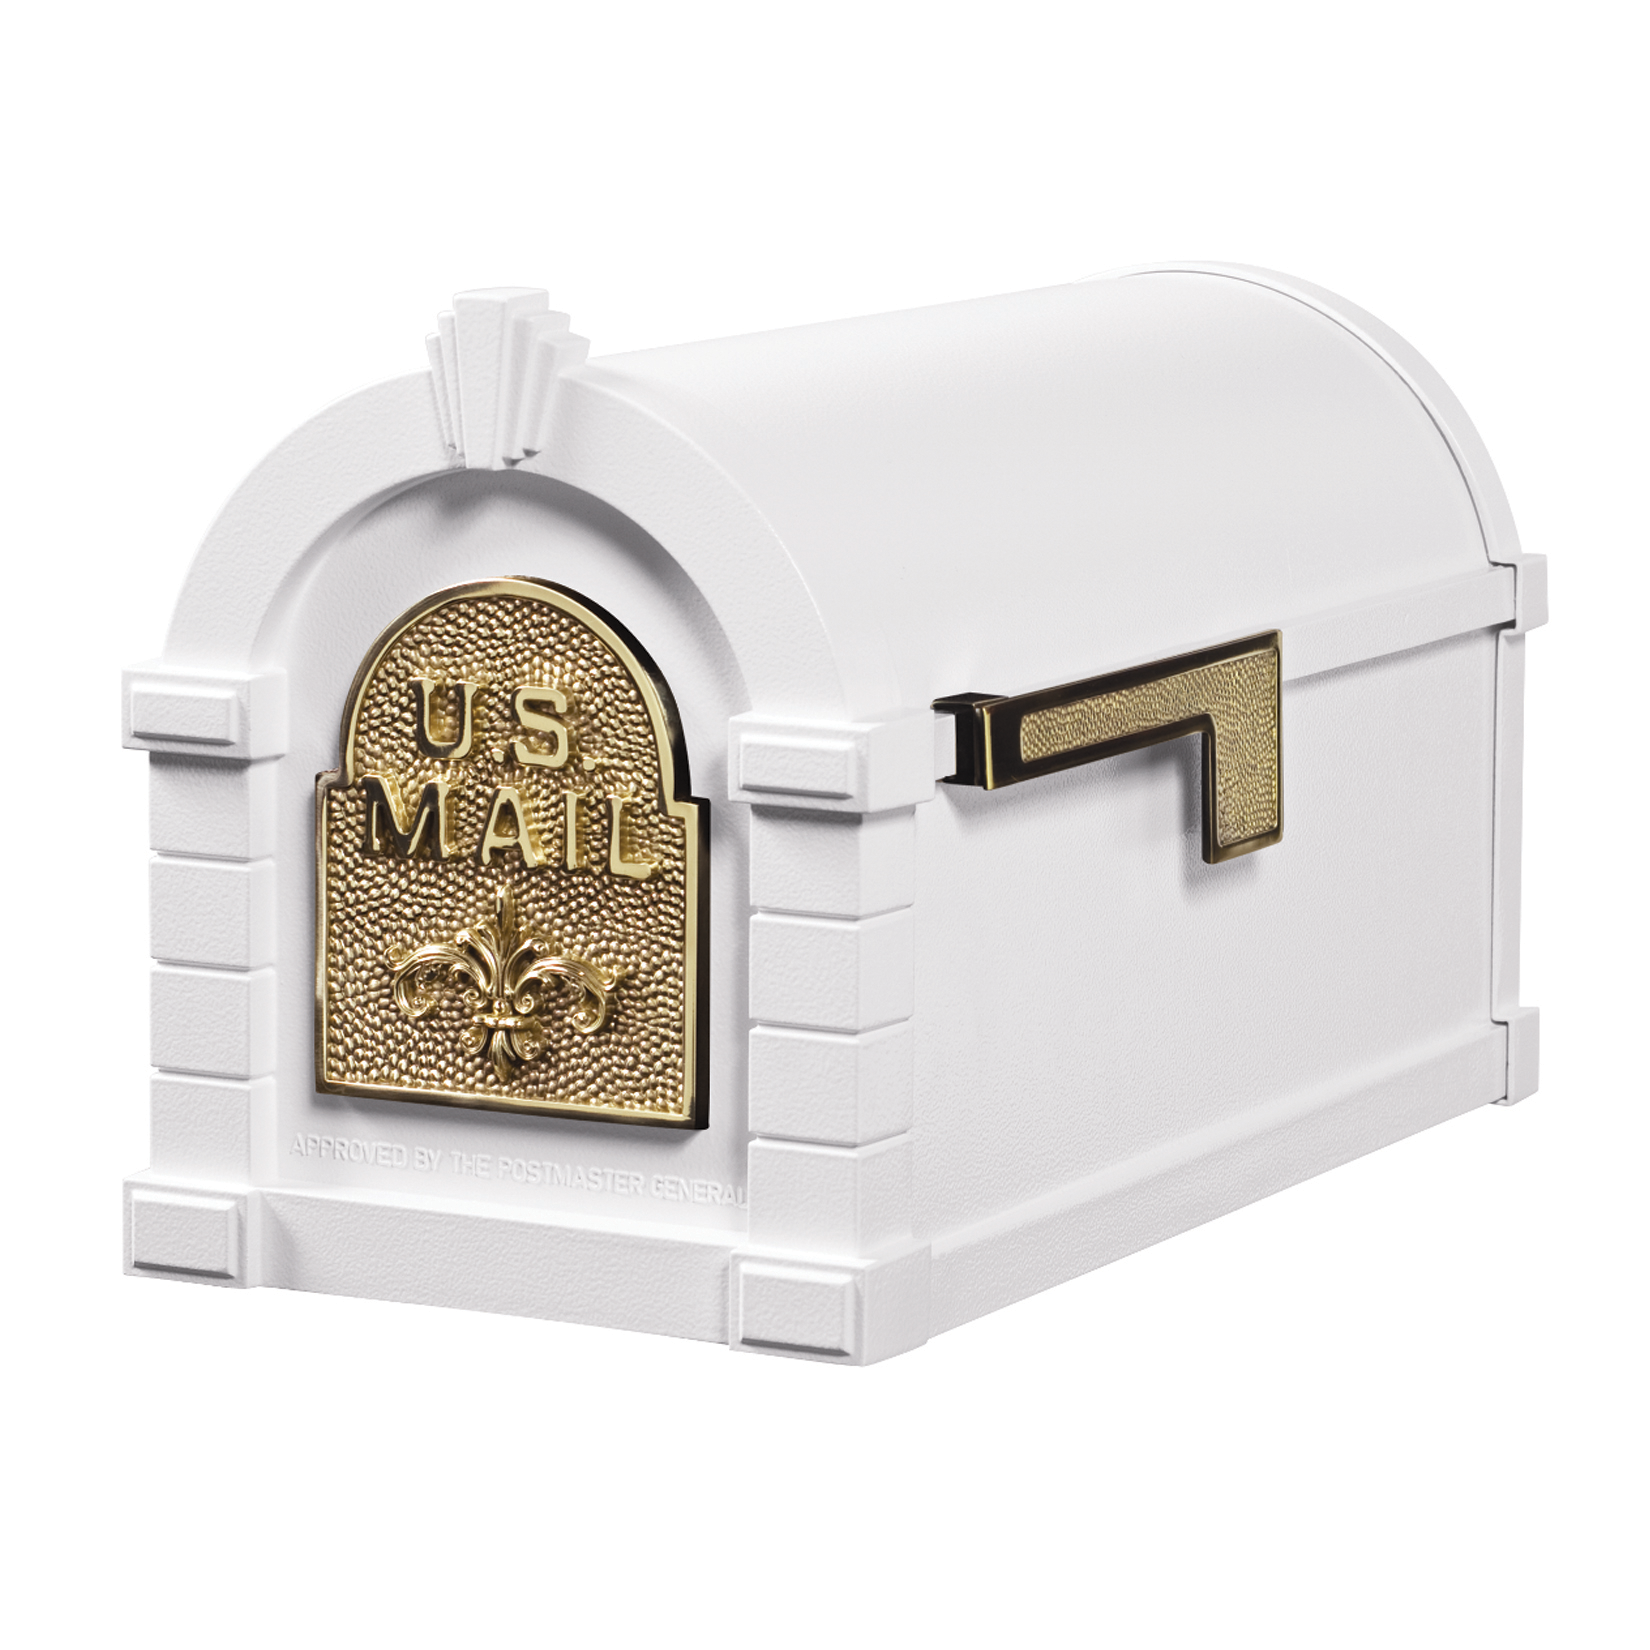 Gaines Fleur De Lis Keystone Mailboxes<br />White with Polished Brass